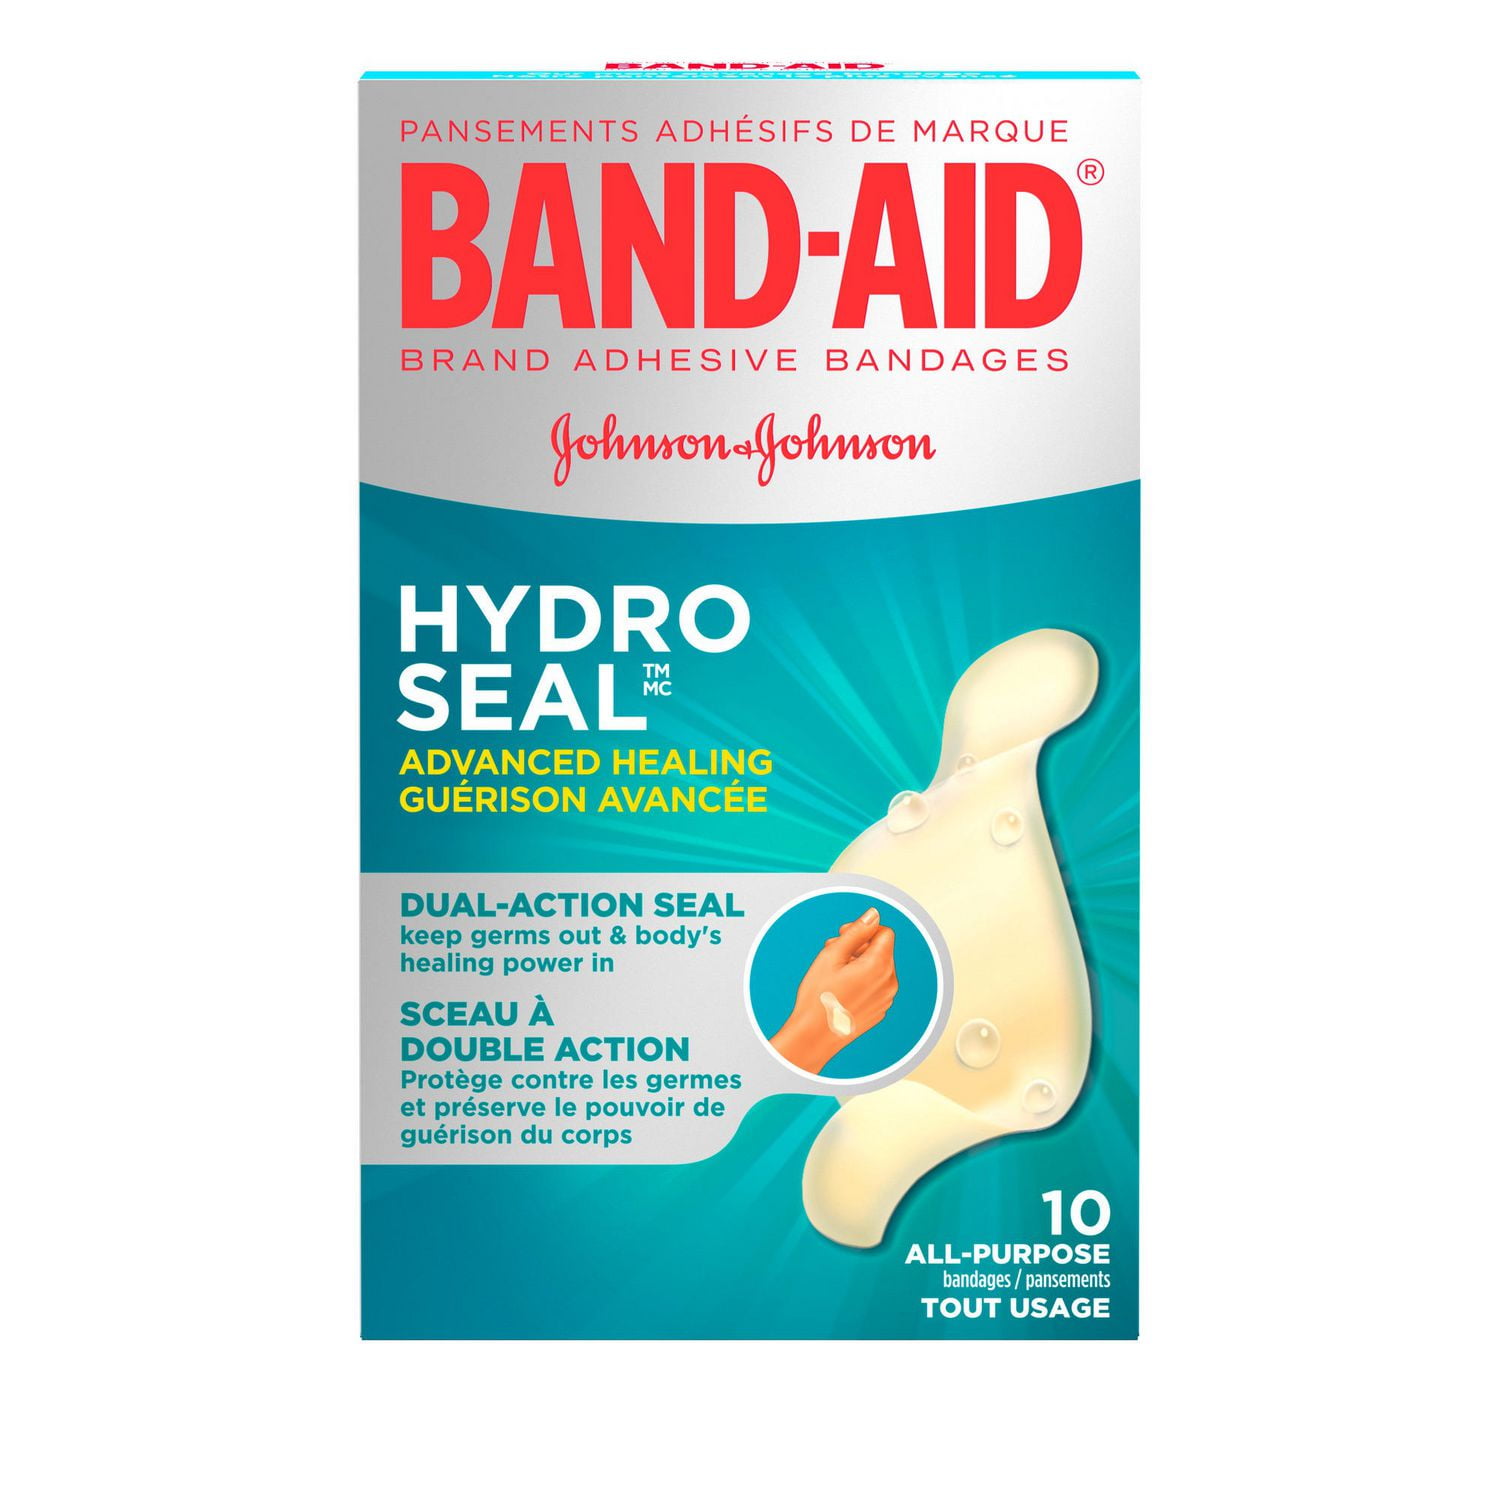 Band-Aid Hydrocolloid All-Purpose Bandages, Waterproof Adhesive Blister  Cushions, Hydro Seal Bandages for Blisters and Wound Care, 10 Count 